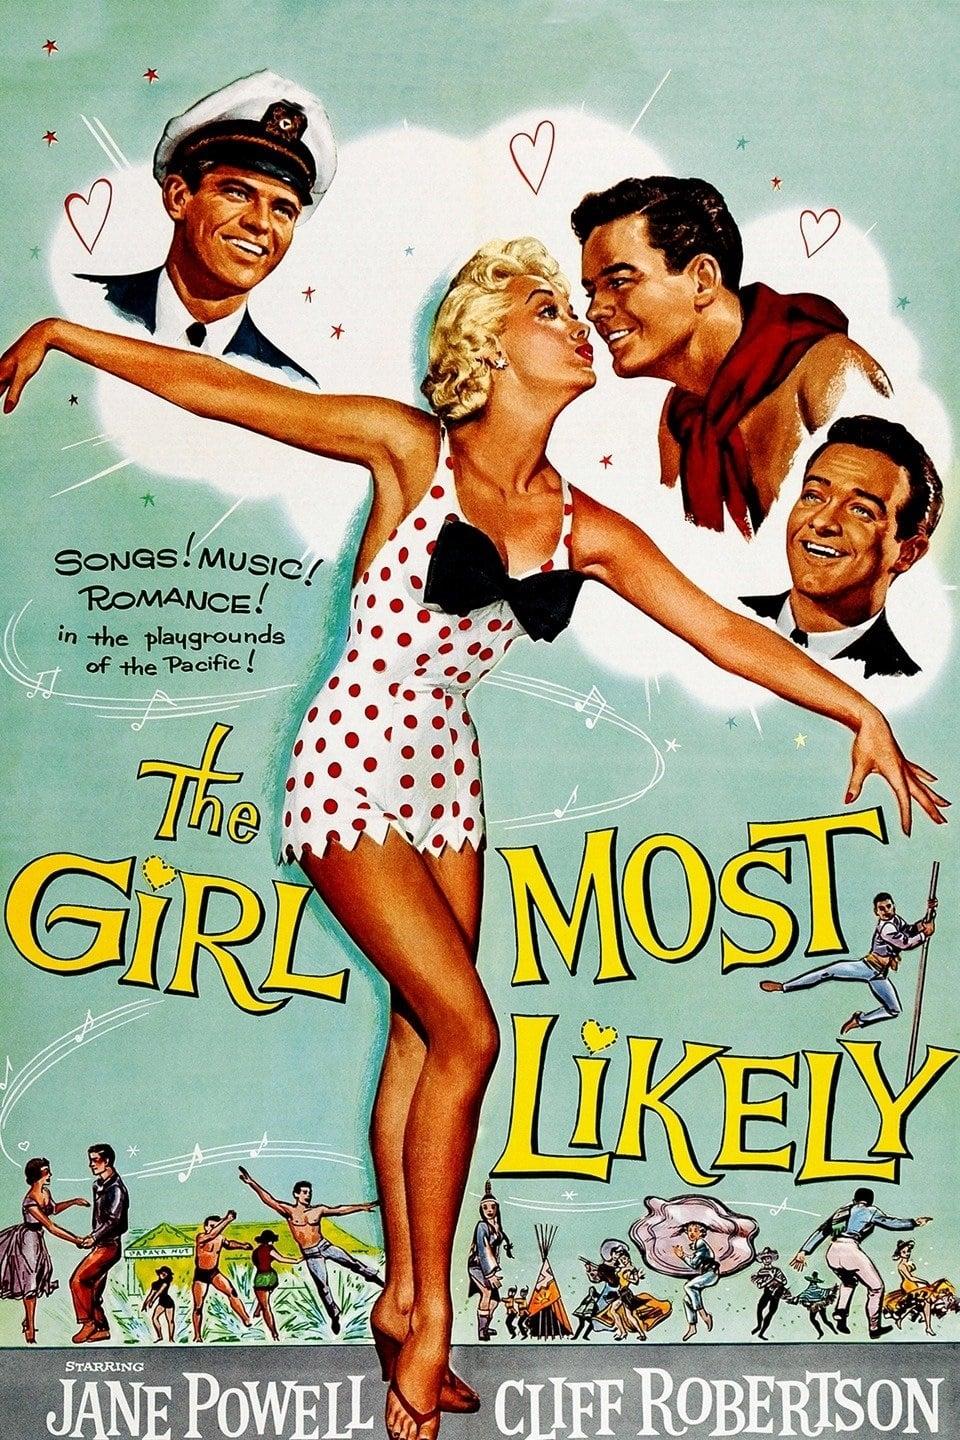 The Girl Most Likely poster